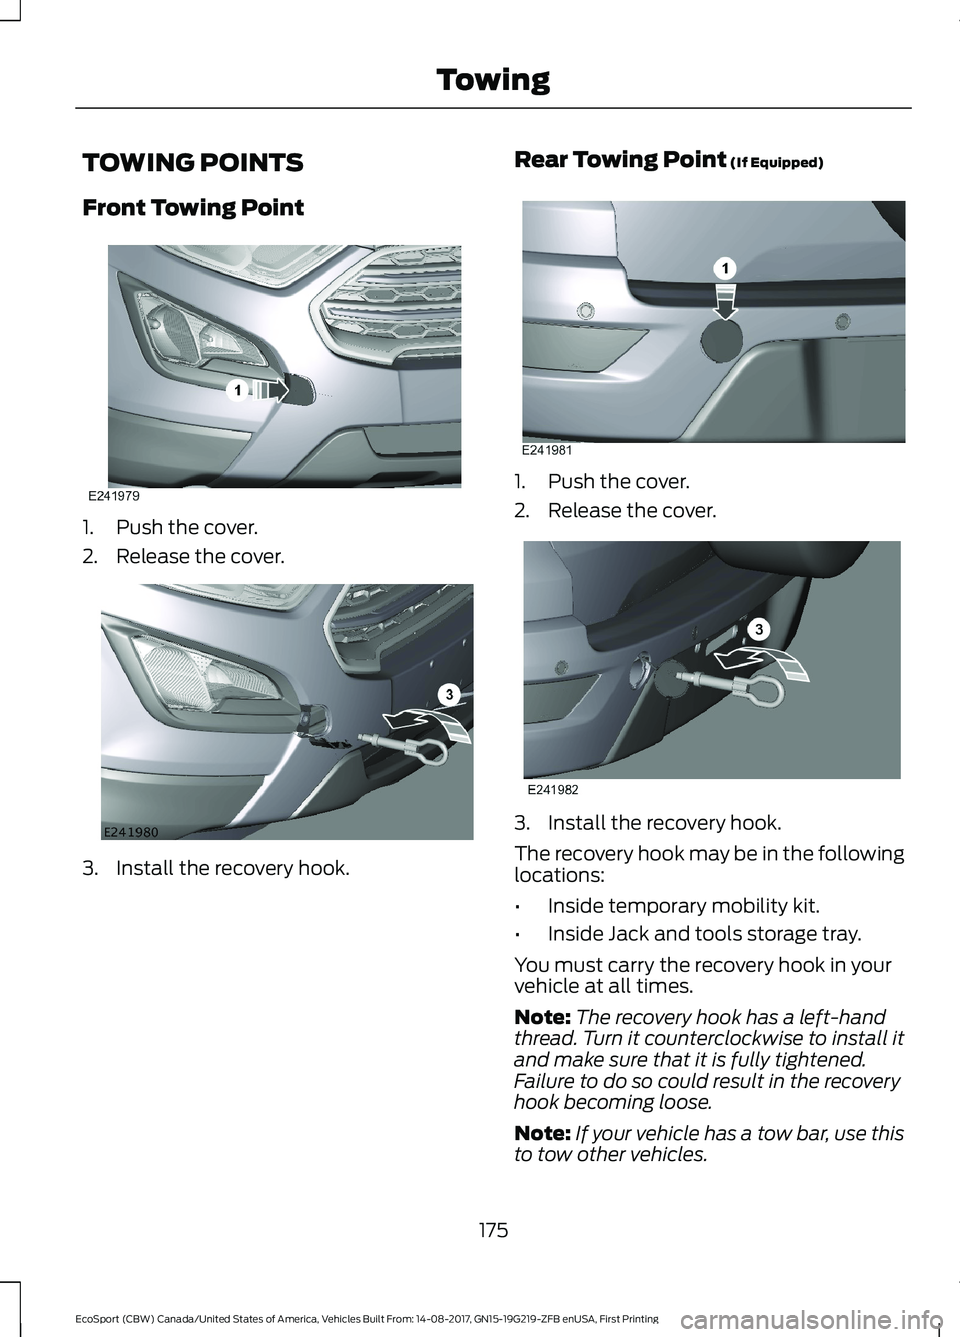 FORD ECOSPORT 2018  Owners Manual TOWING POINTS
Front Towing Point
1.Push the cover.
2.Release the cover.
3.Install the recovery hook.
Rear Towing Point (If Equipped)
1.Push the cover.
2.Release the cover.
3.Install the recovery hook.